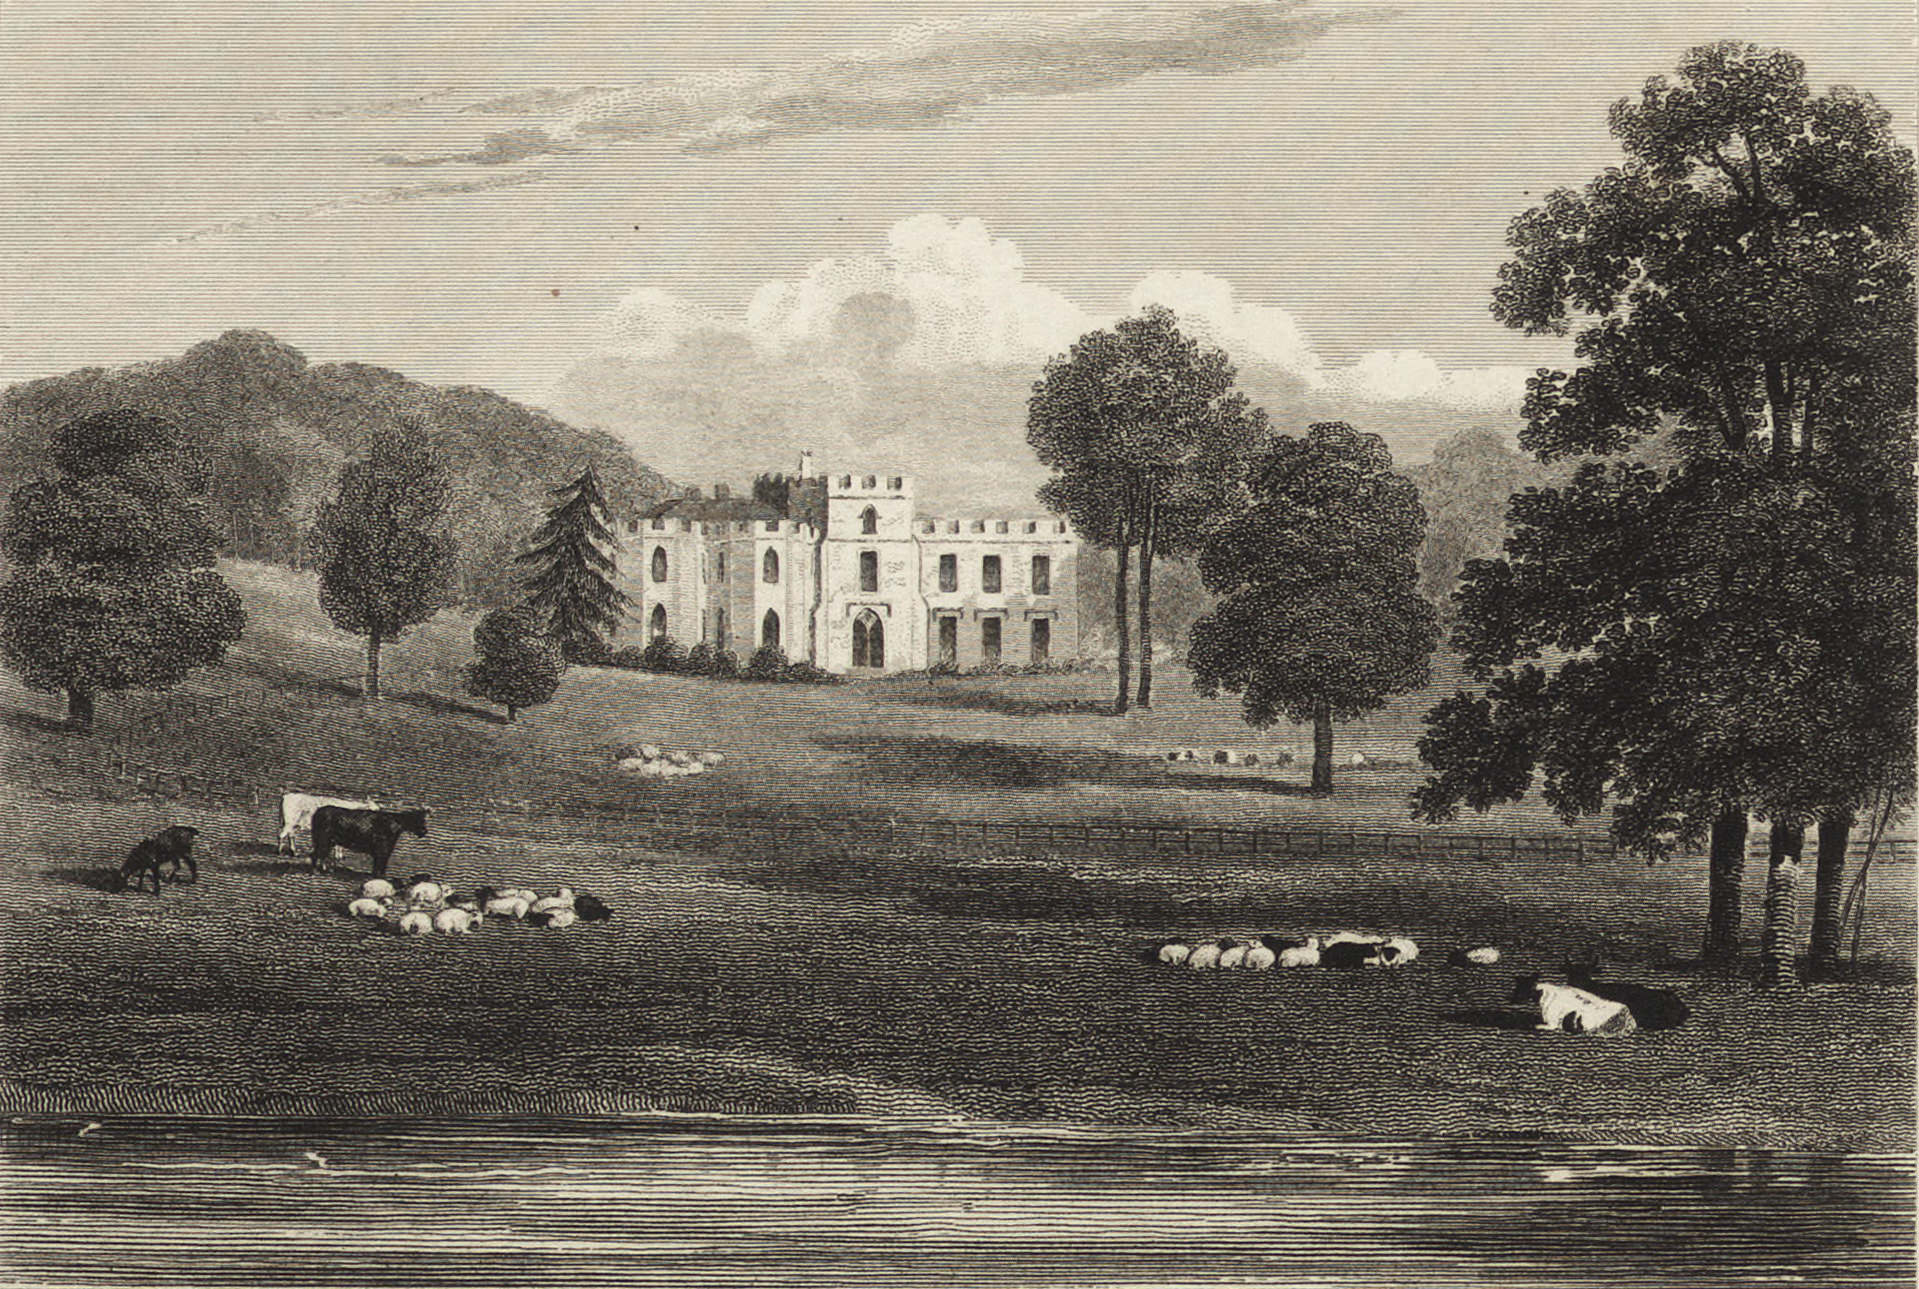 <i>Hertfordshire</i> in <i>Views of the Seats, Mansions, Castles, etc. of Noblemen and Gentlemen in England</i>, Vol. 1 (London: Jones & Co. 1829), 151., 1829, engraving. Collection of Getty Research Institute (6575).